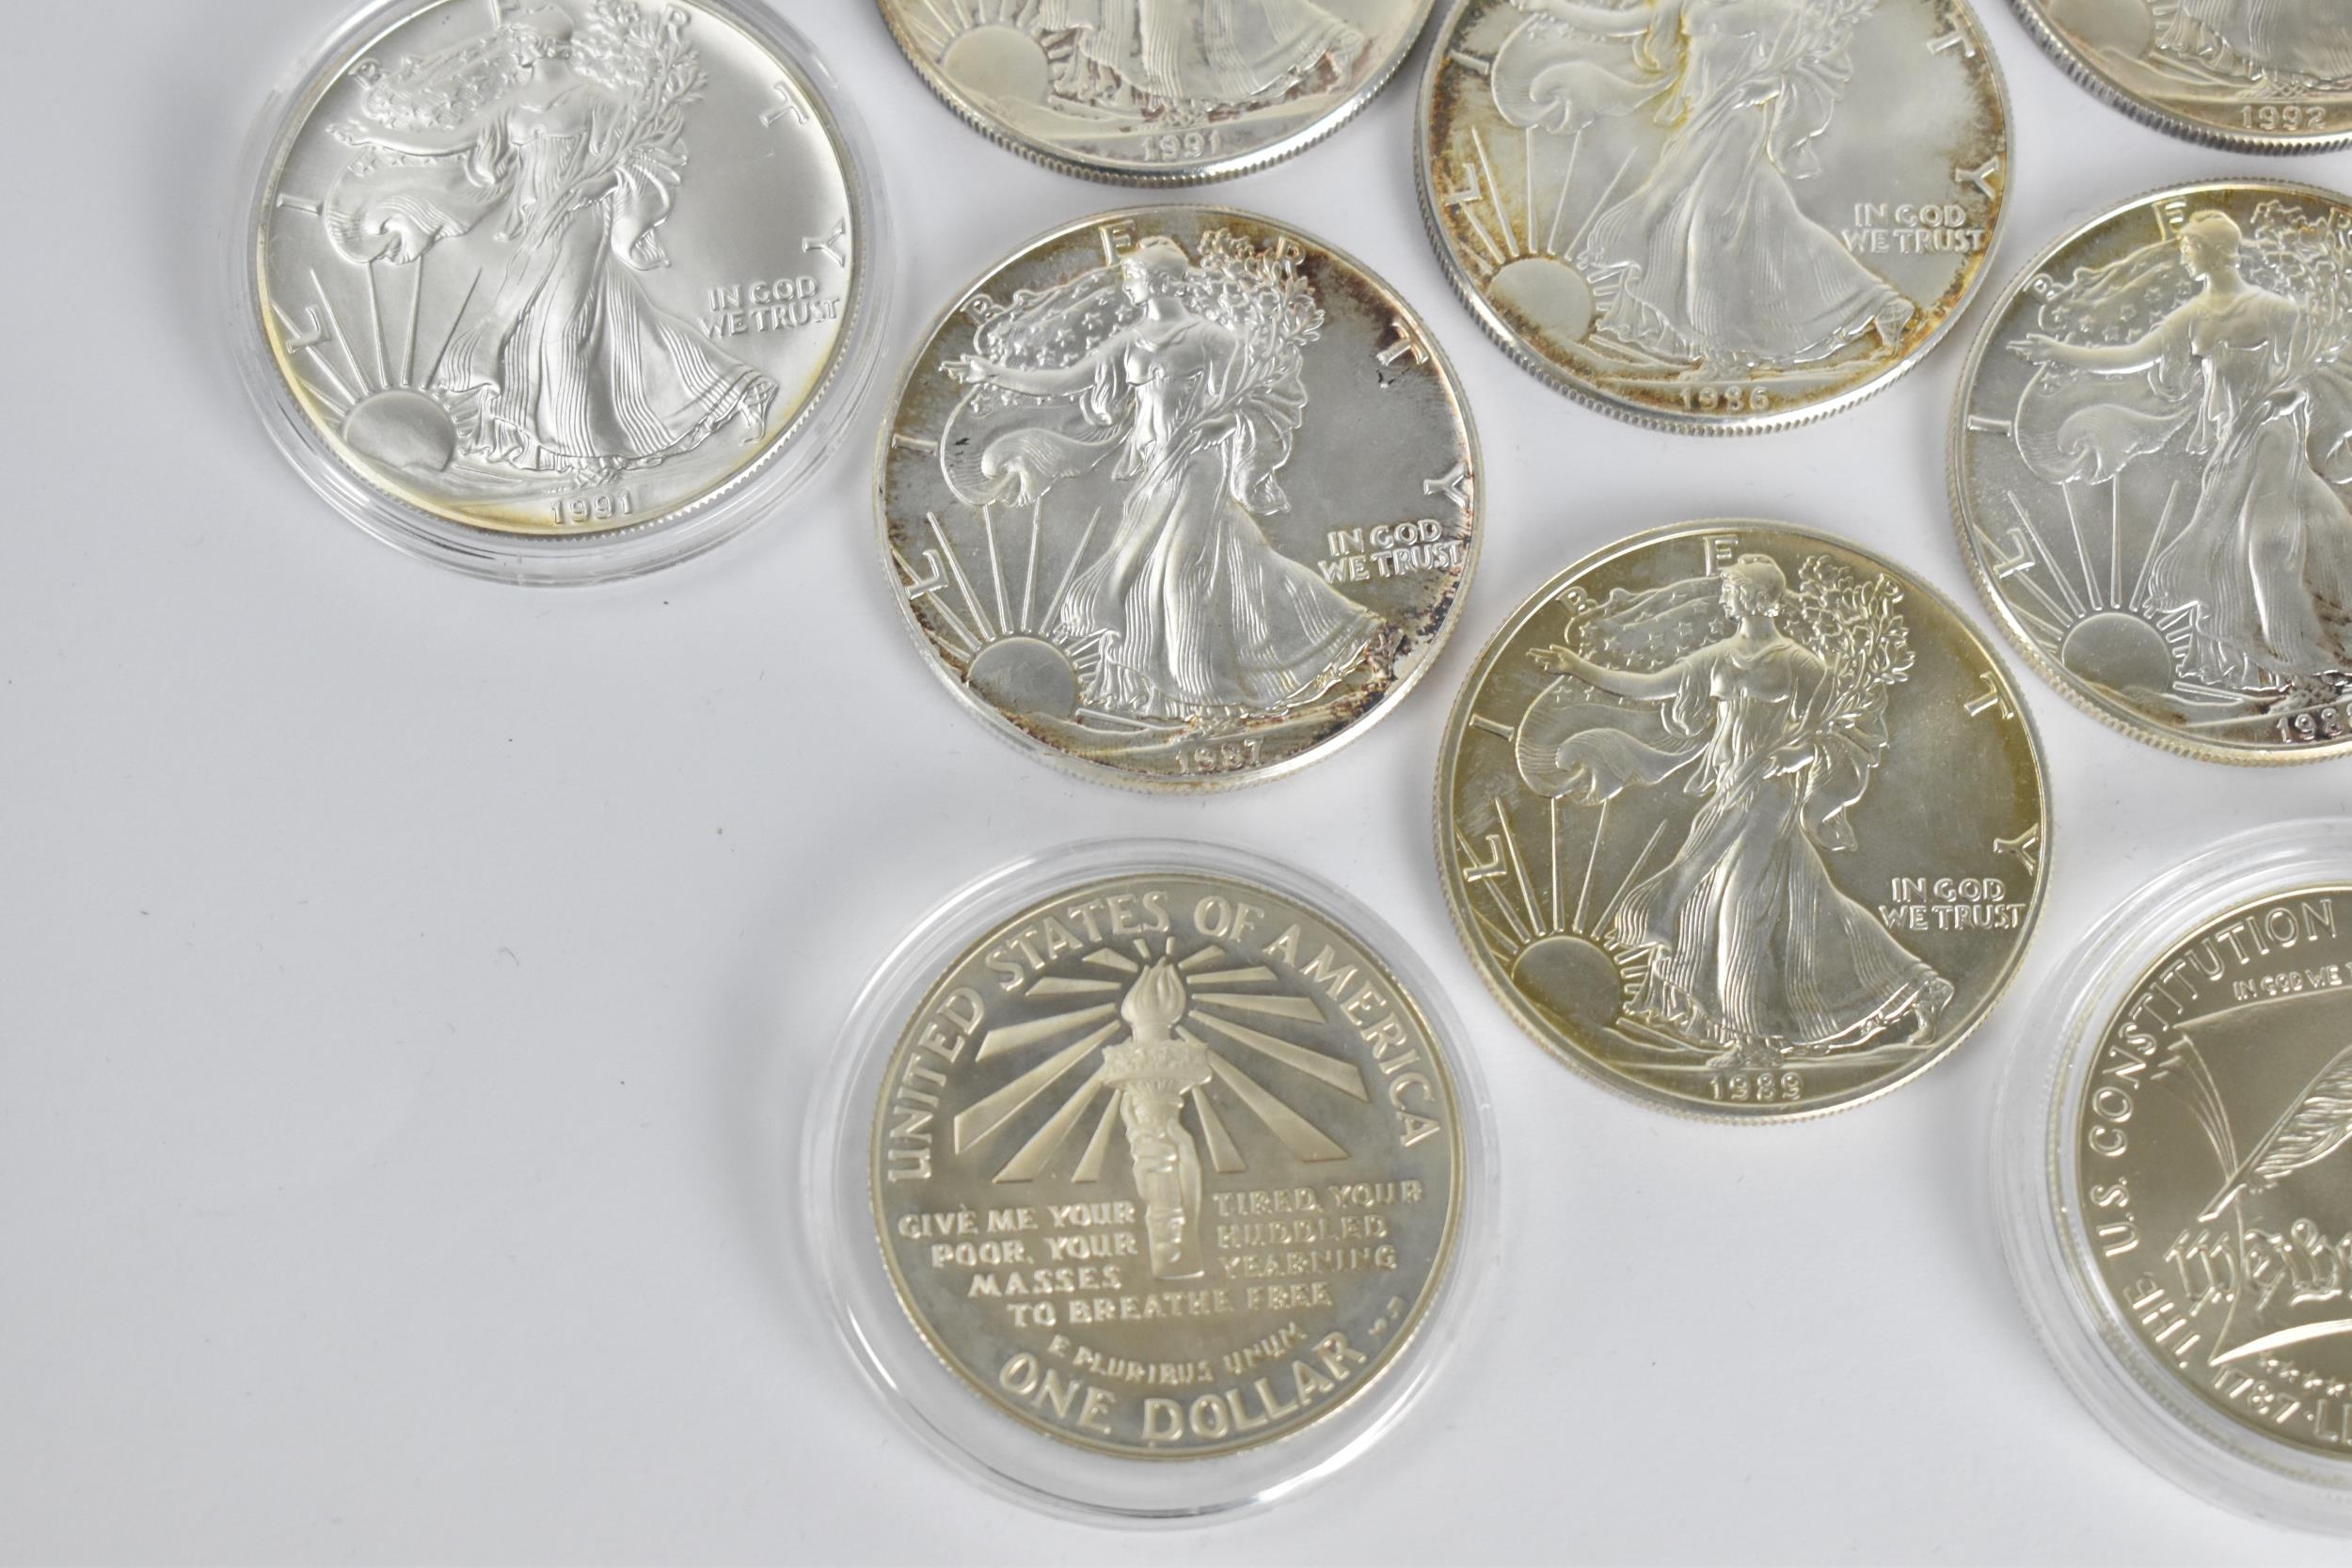 Official Silver Coins of The United States of America' part of the Royal Mint collection, eight ' - Image 7 of 10